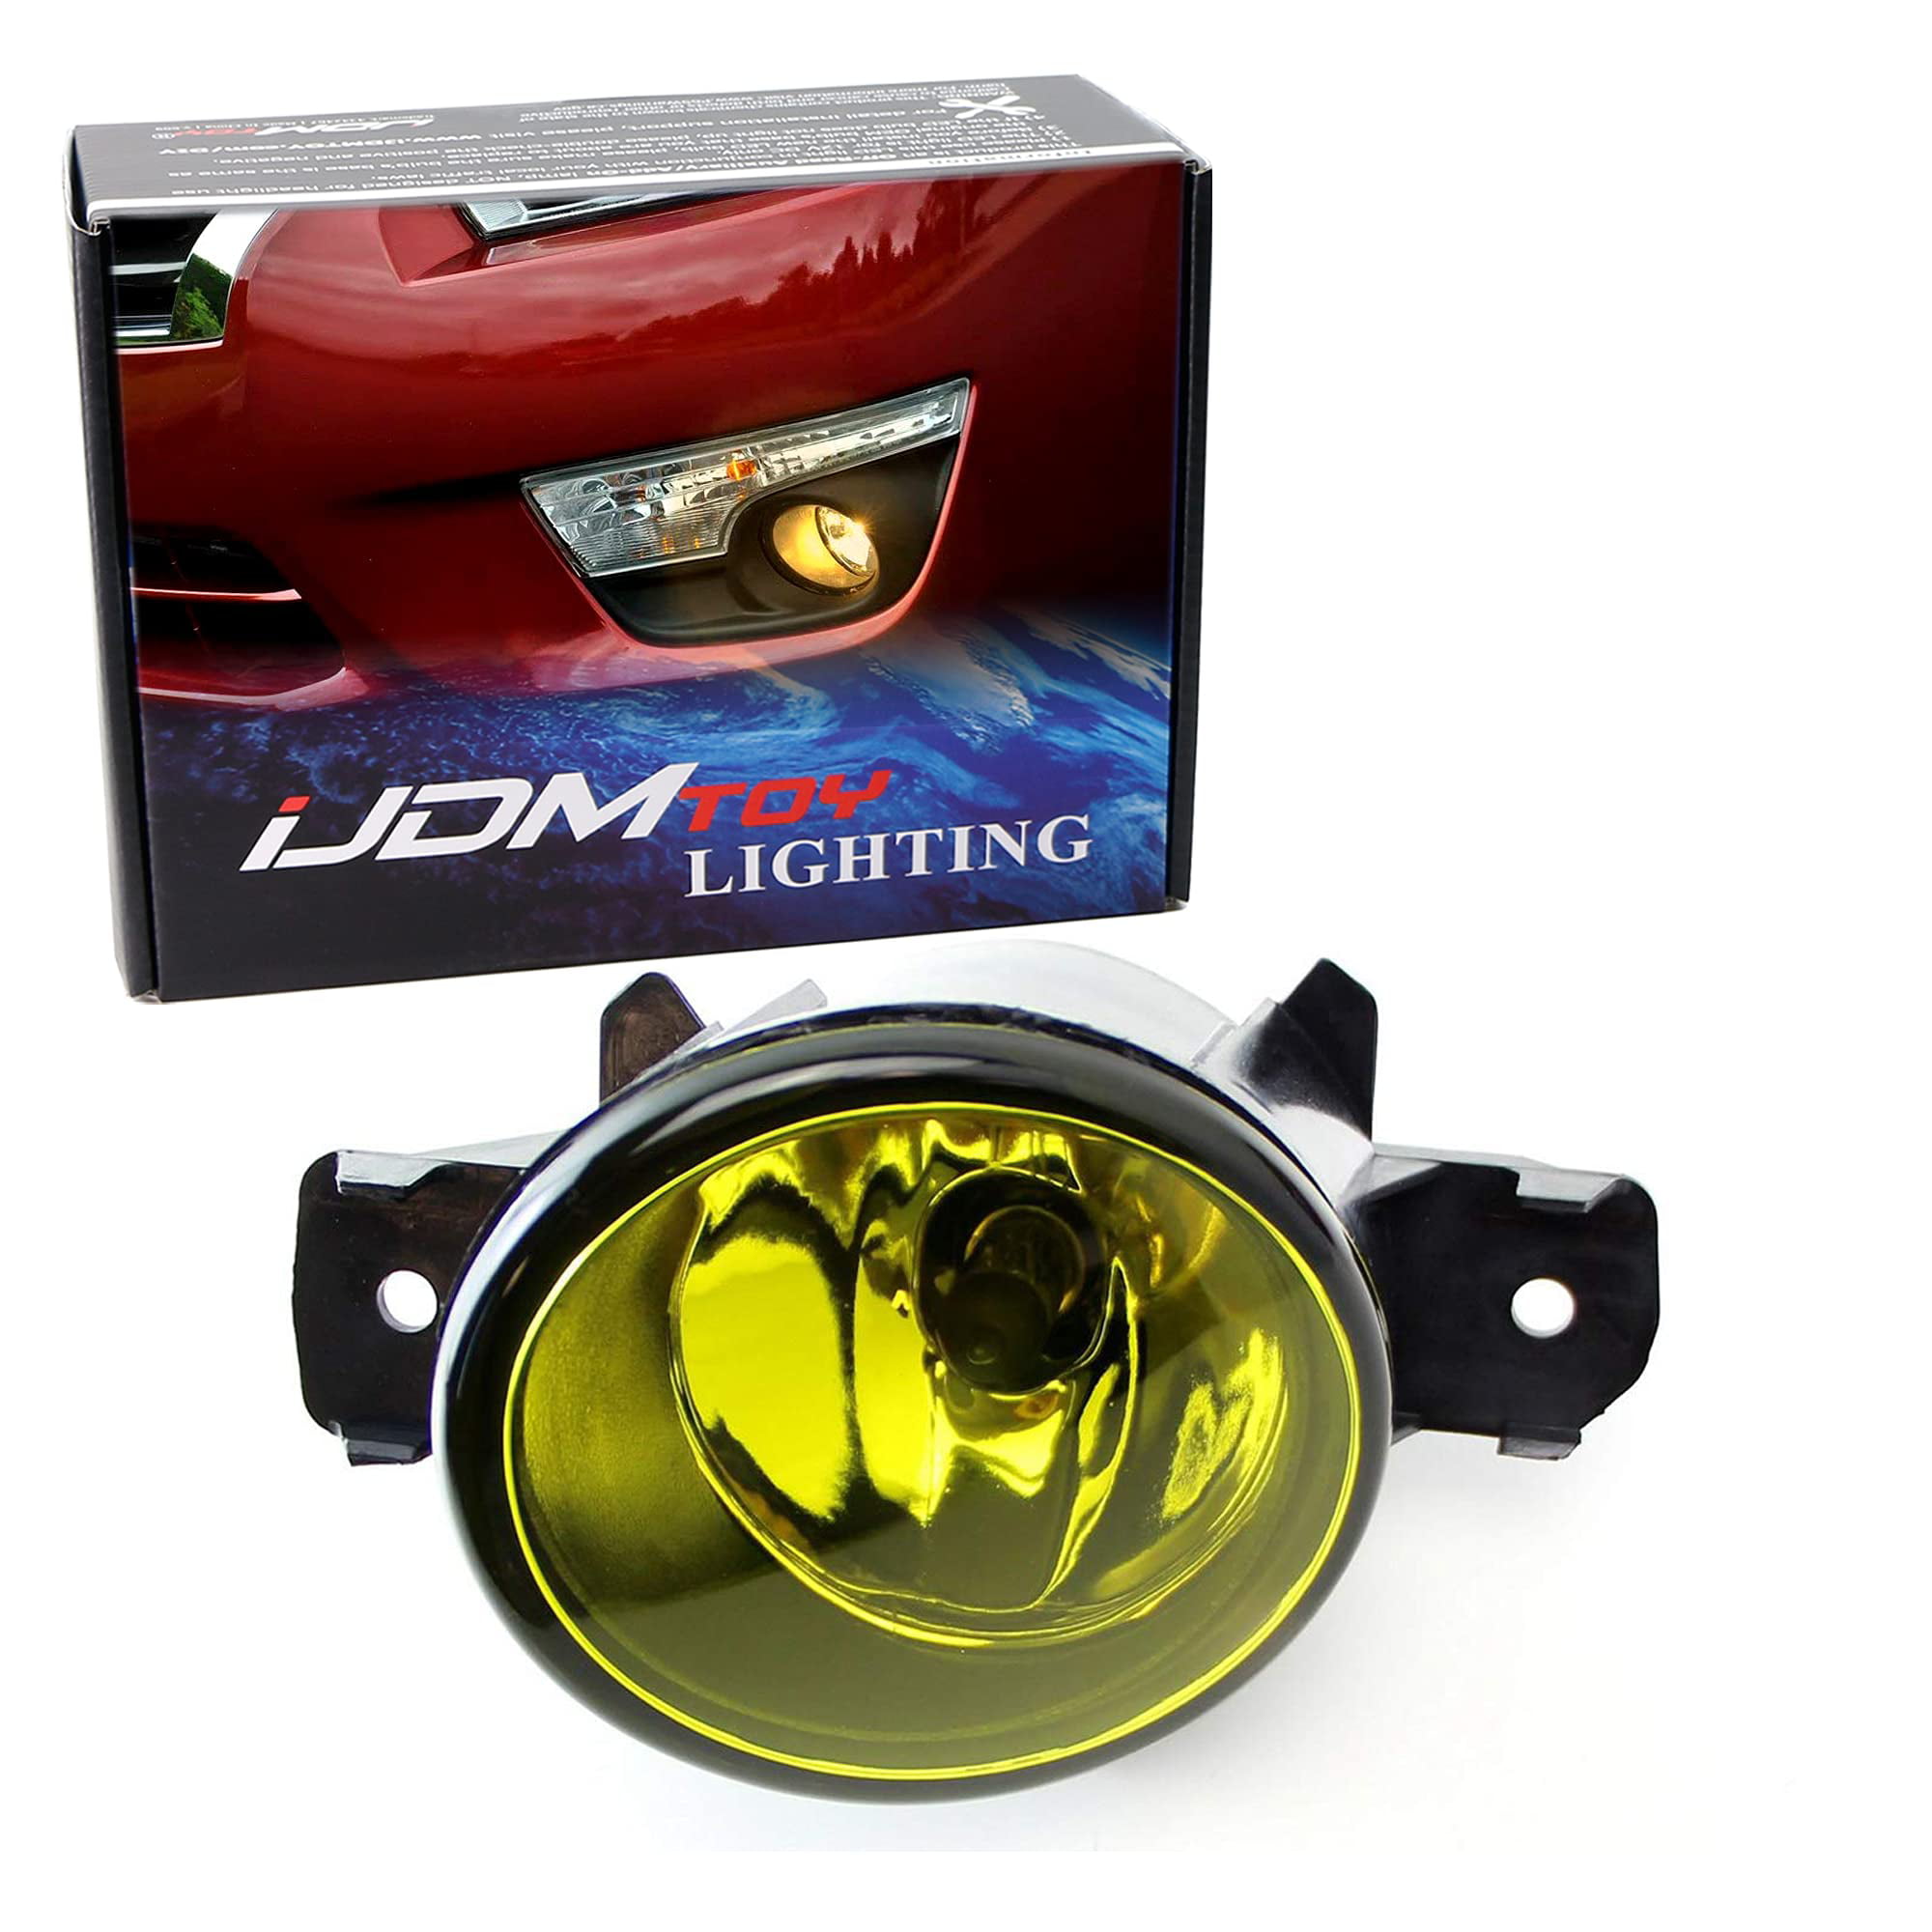 Driver Passenger Side Assembly w/ 2 iJDMTOY Pair of Selective Yellow Lens Halogen Fog Lamps Compatible With Nissan & Infiniti 55W H11 Halogen Bulbs 